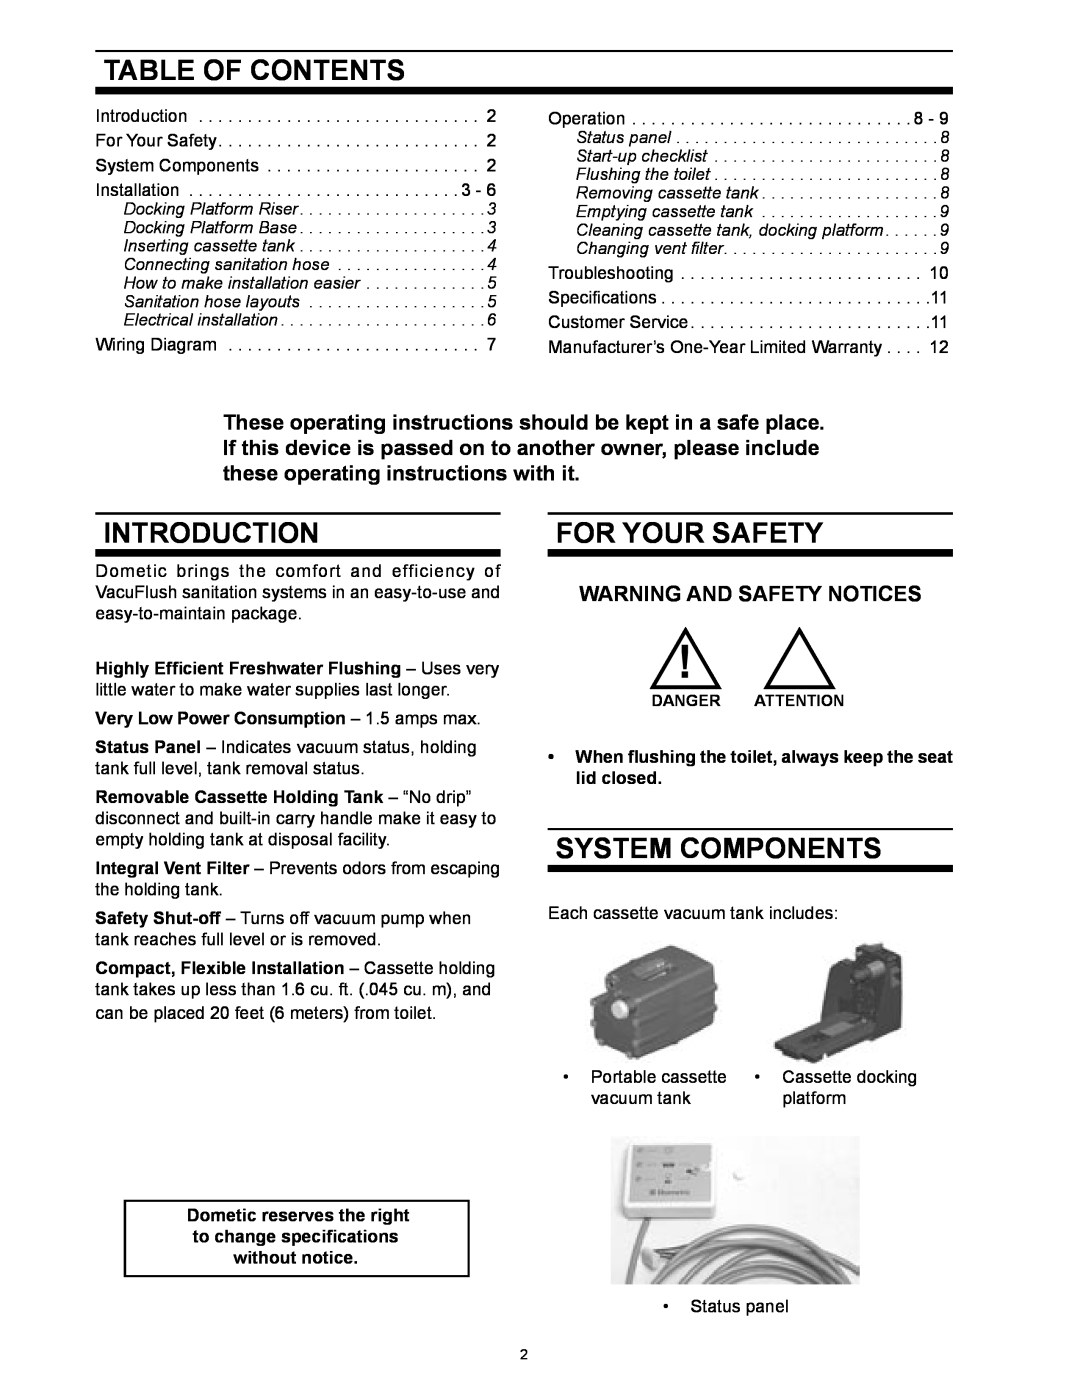 SeaLand 1 2500 Series Table Of Contents, Introduction, For Your Safety, System Components, Warning And Safety Notices 